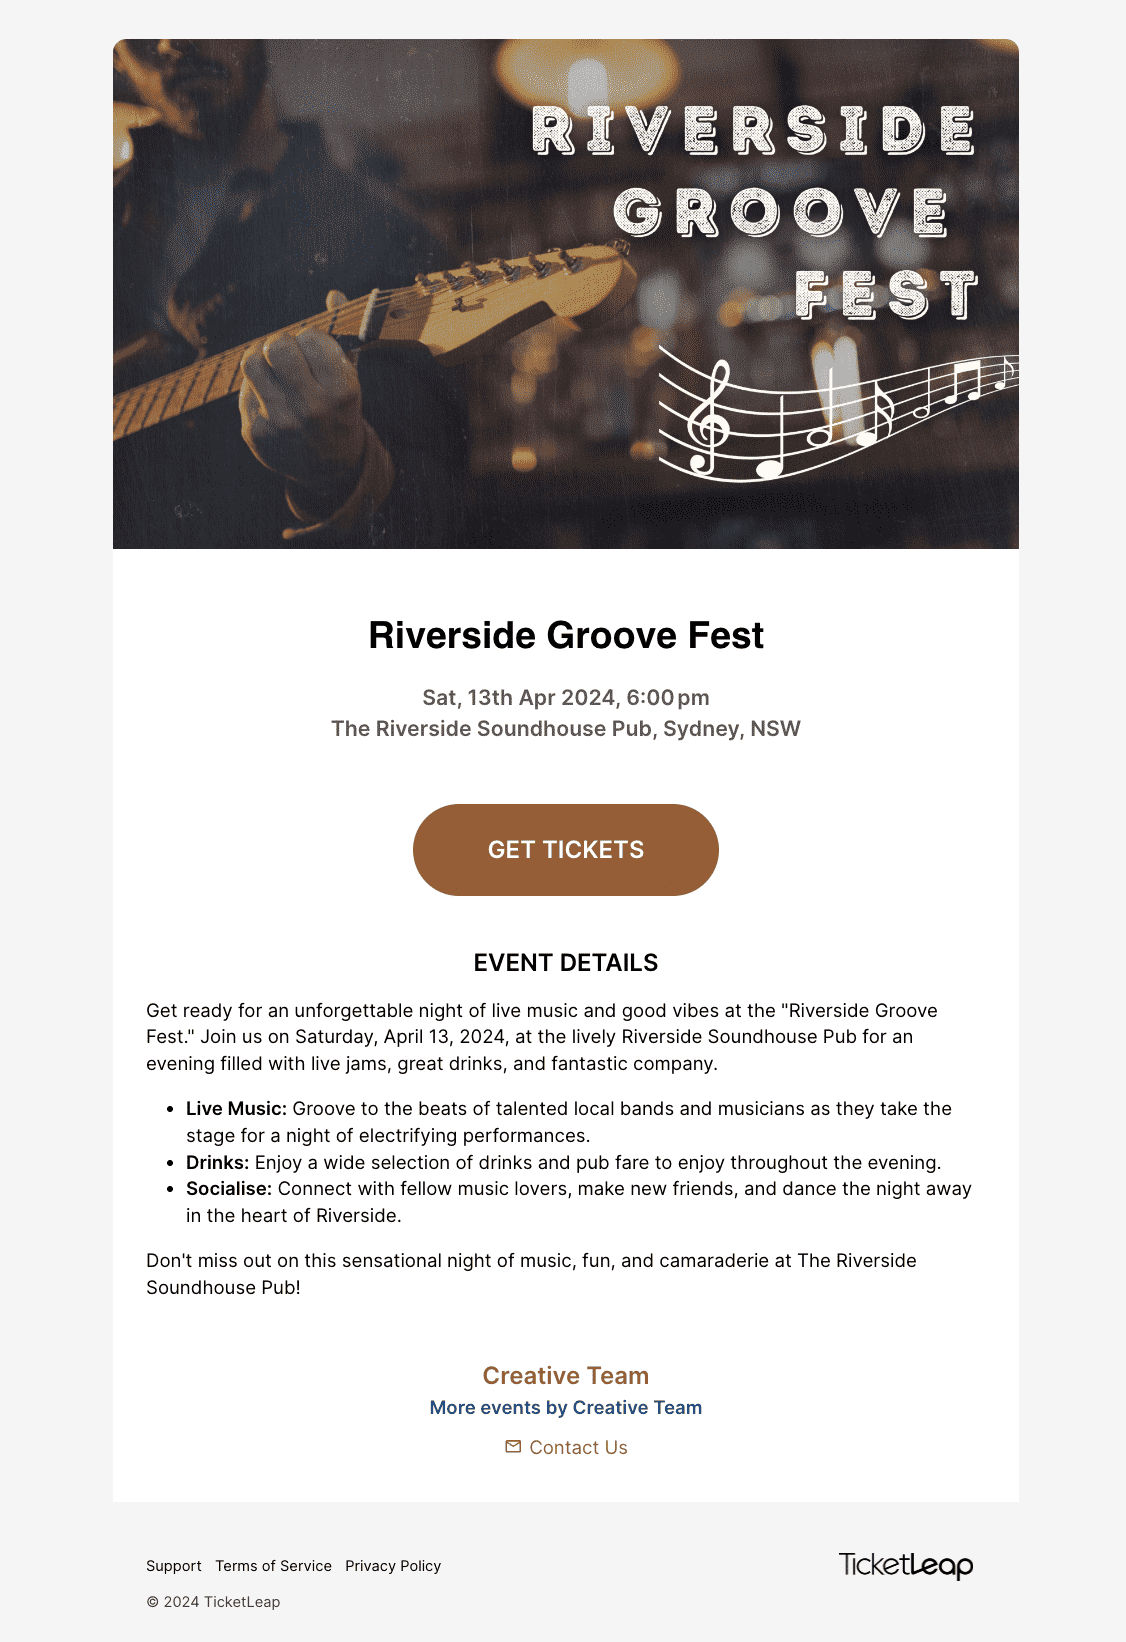 A great event landing page for a a music festival featuring an image of someone playing guitar